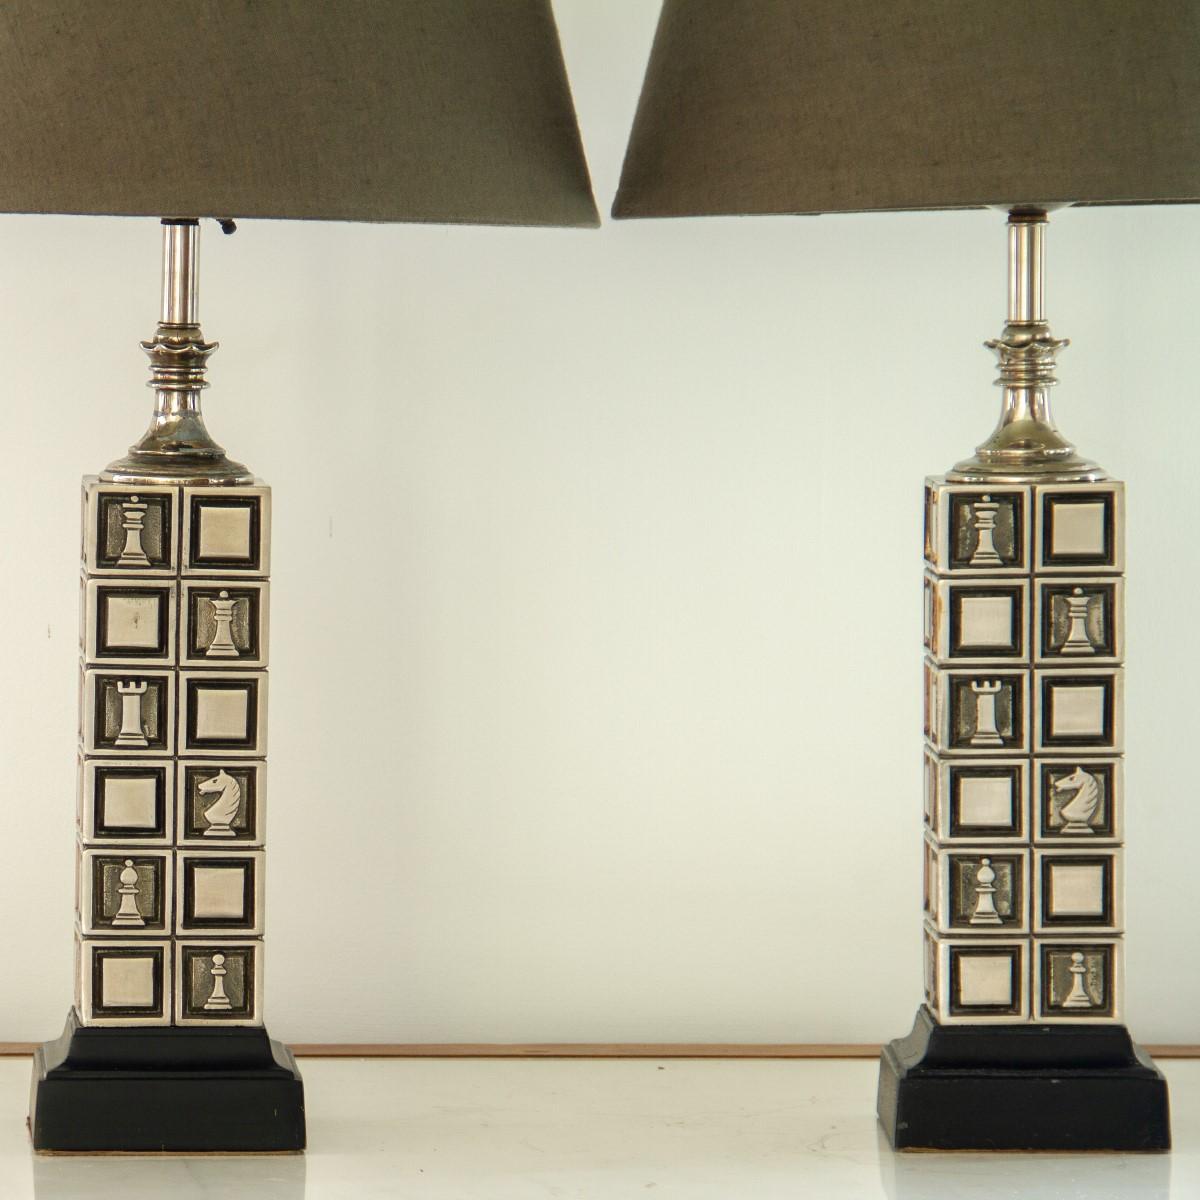 A pair of chess board designed lamps with hammered and brushed metalwork depicting the checkerboard and playing pieces, set on wooden ebonised stepped base

These lamps were designed by The Rembrandt Light Company who started operations in